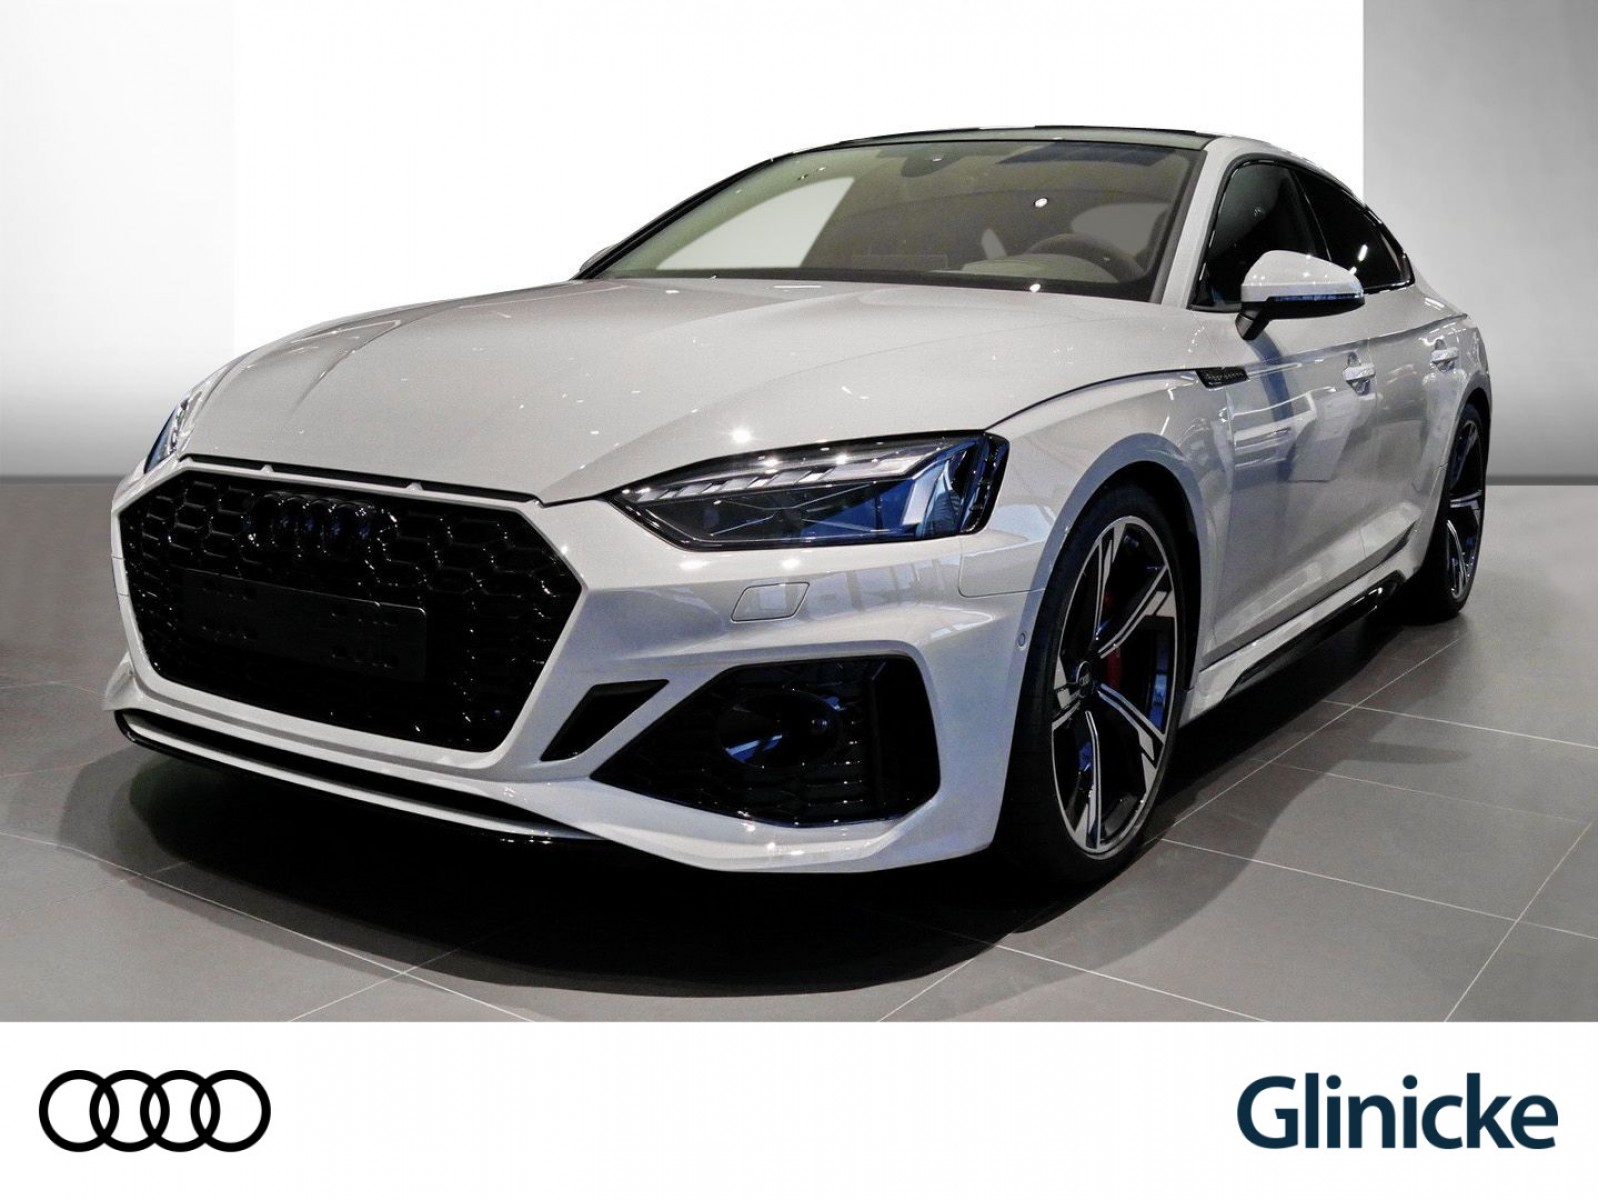 RS 5 Sportback 331(450) kW(PS) tiptronic